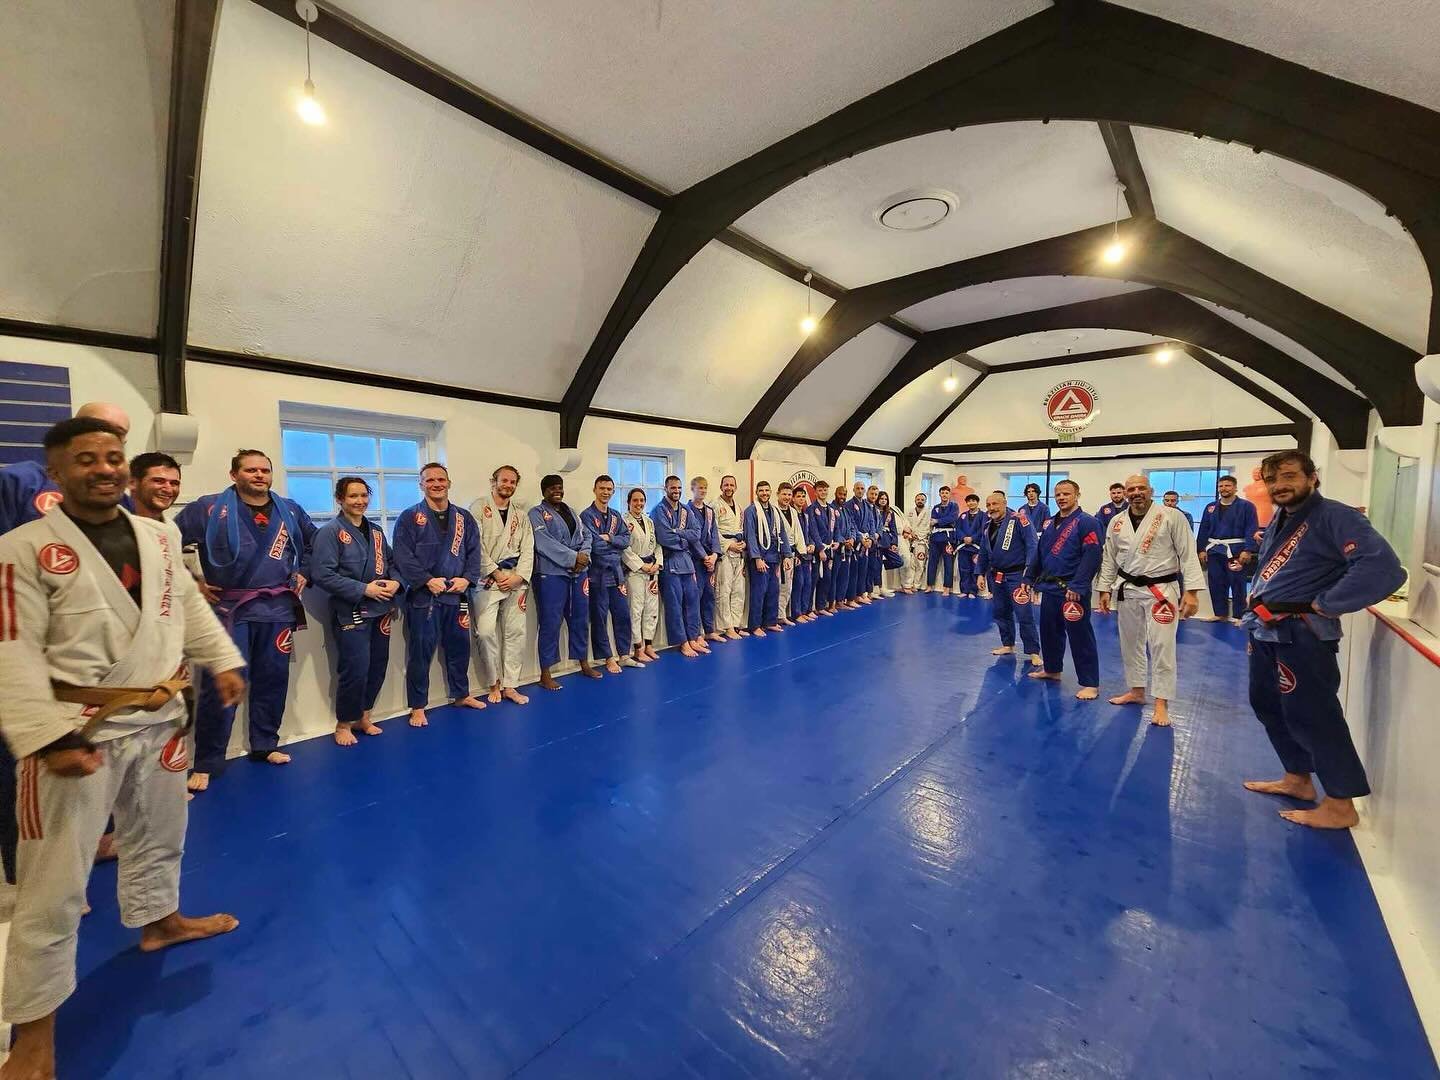 Cracking night tonight - the notorious #gbglos comp class was stacked with coloured belts and the combined GB1/2 class equally stacked with then next generation of winners &hellip; culminating in a new purple belt, two new blue belts and a host of st